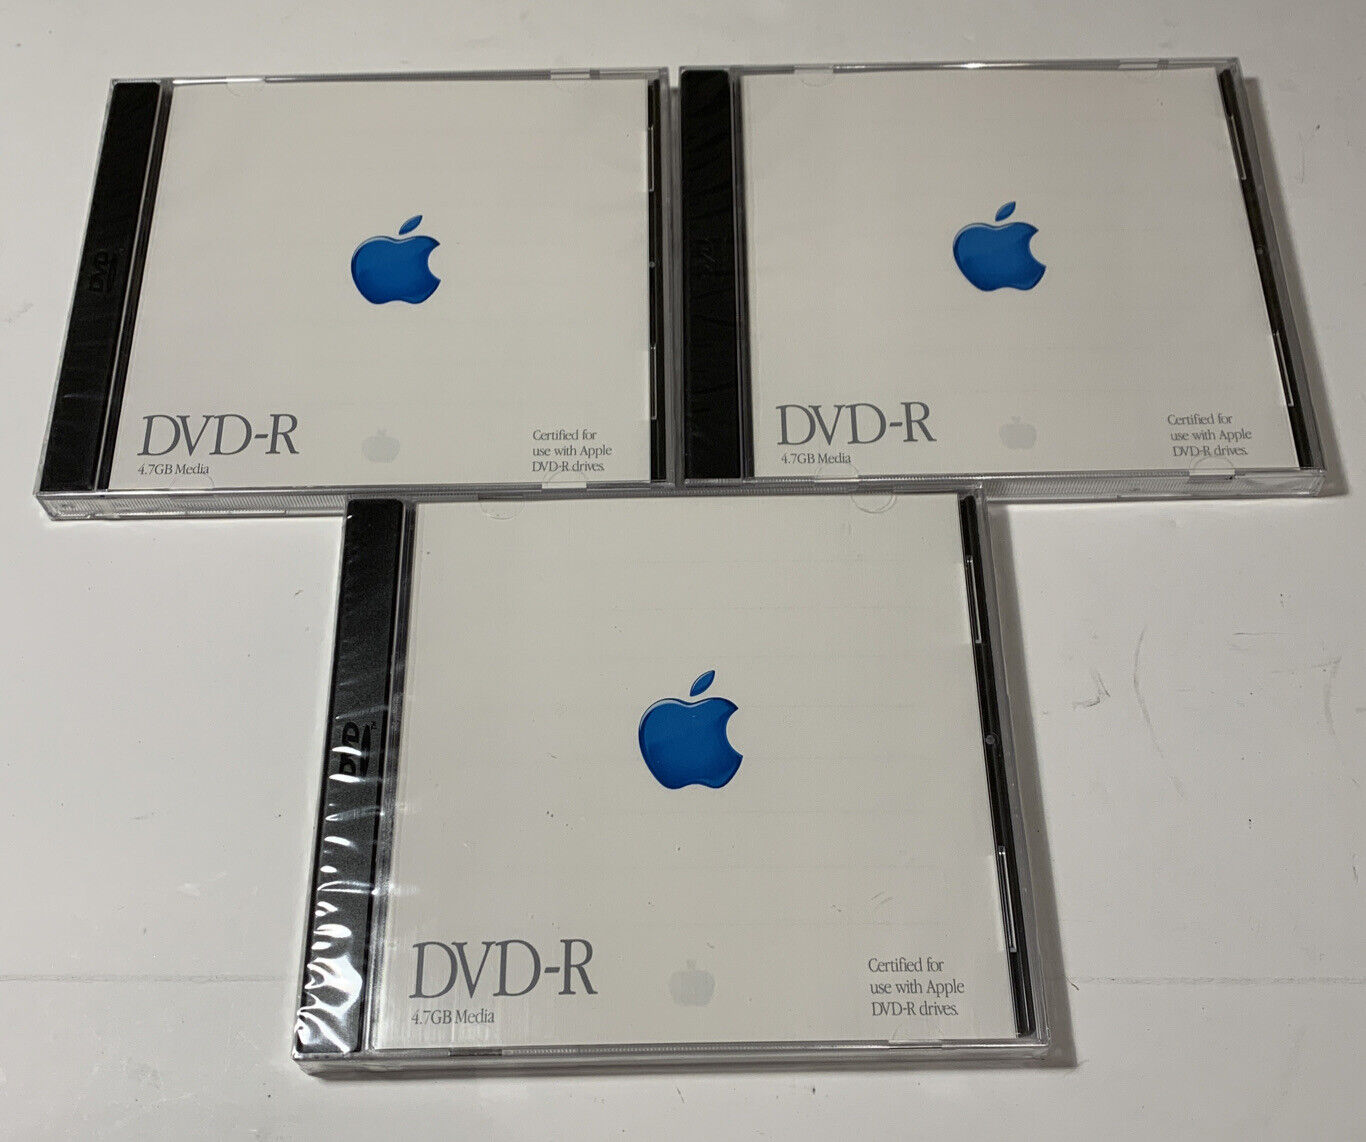 New Certified Apple DVD-R Recordable DVD 4.7GB Discs Media Sealed Lot of 3